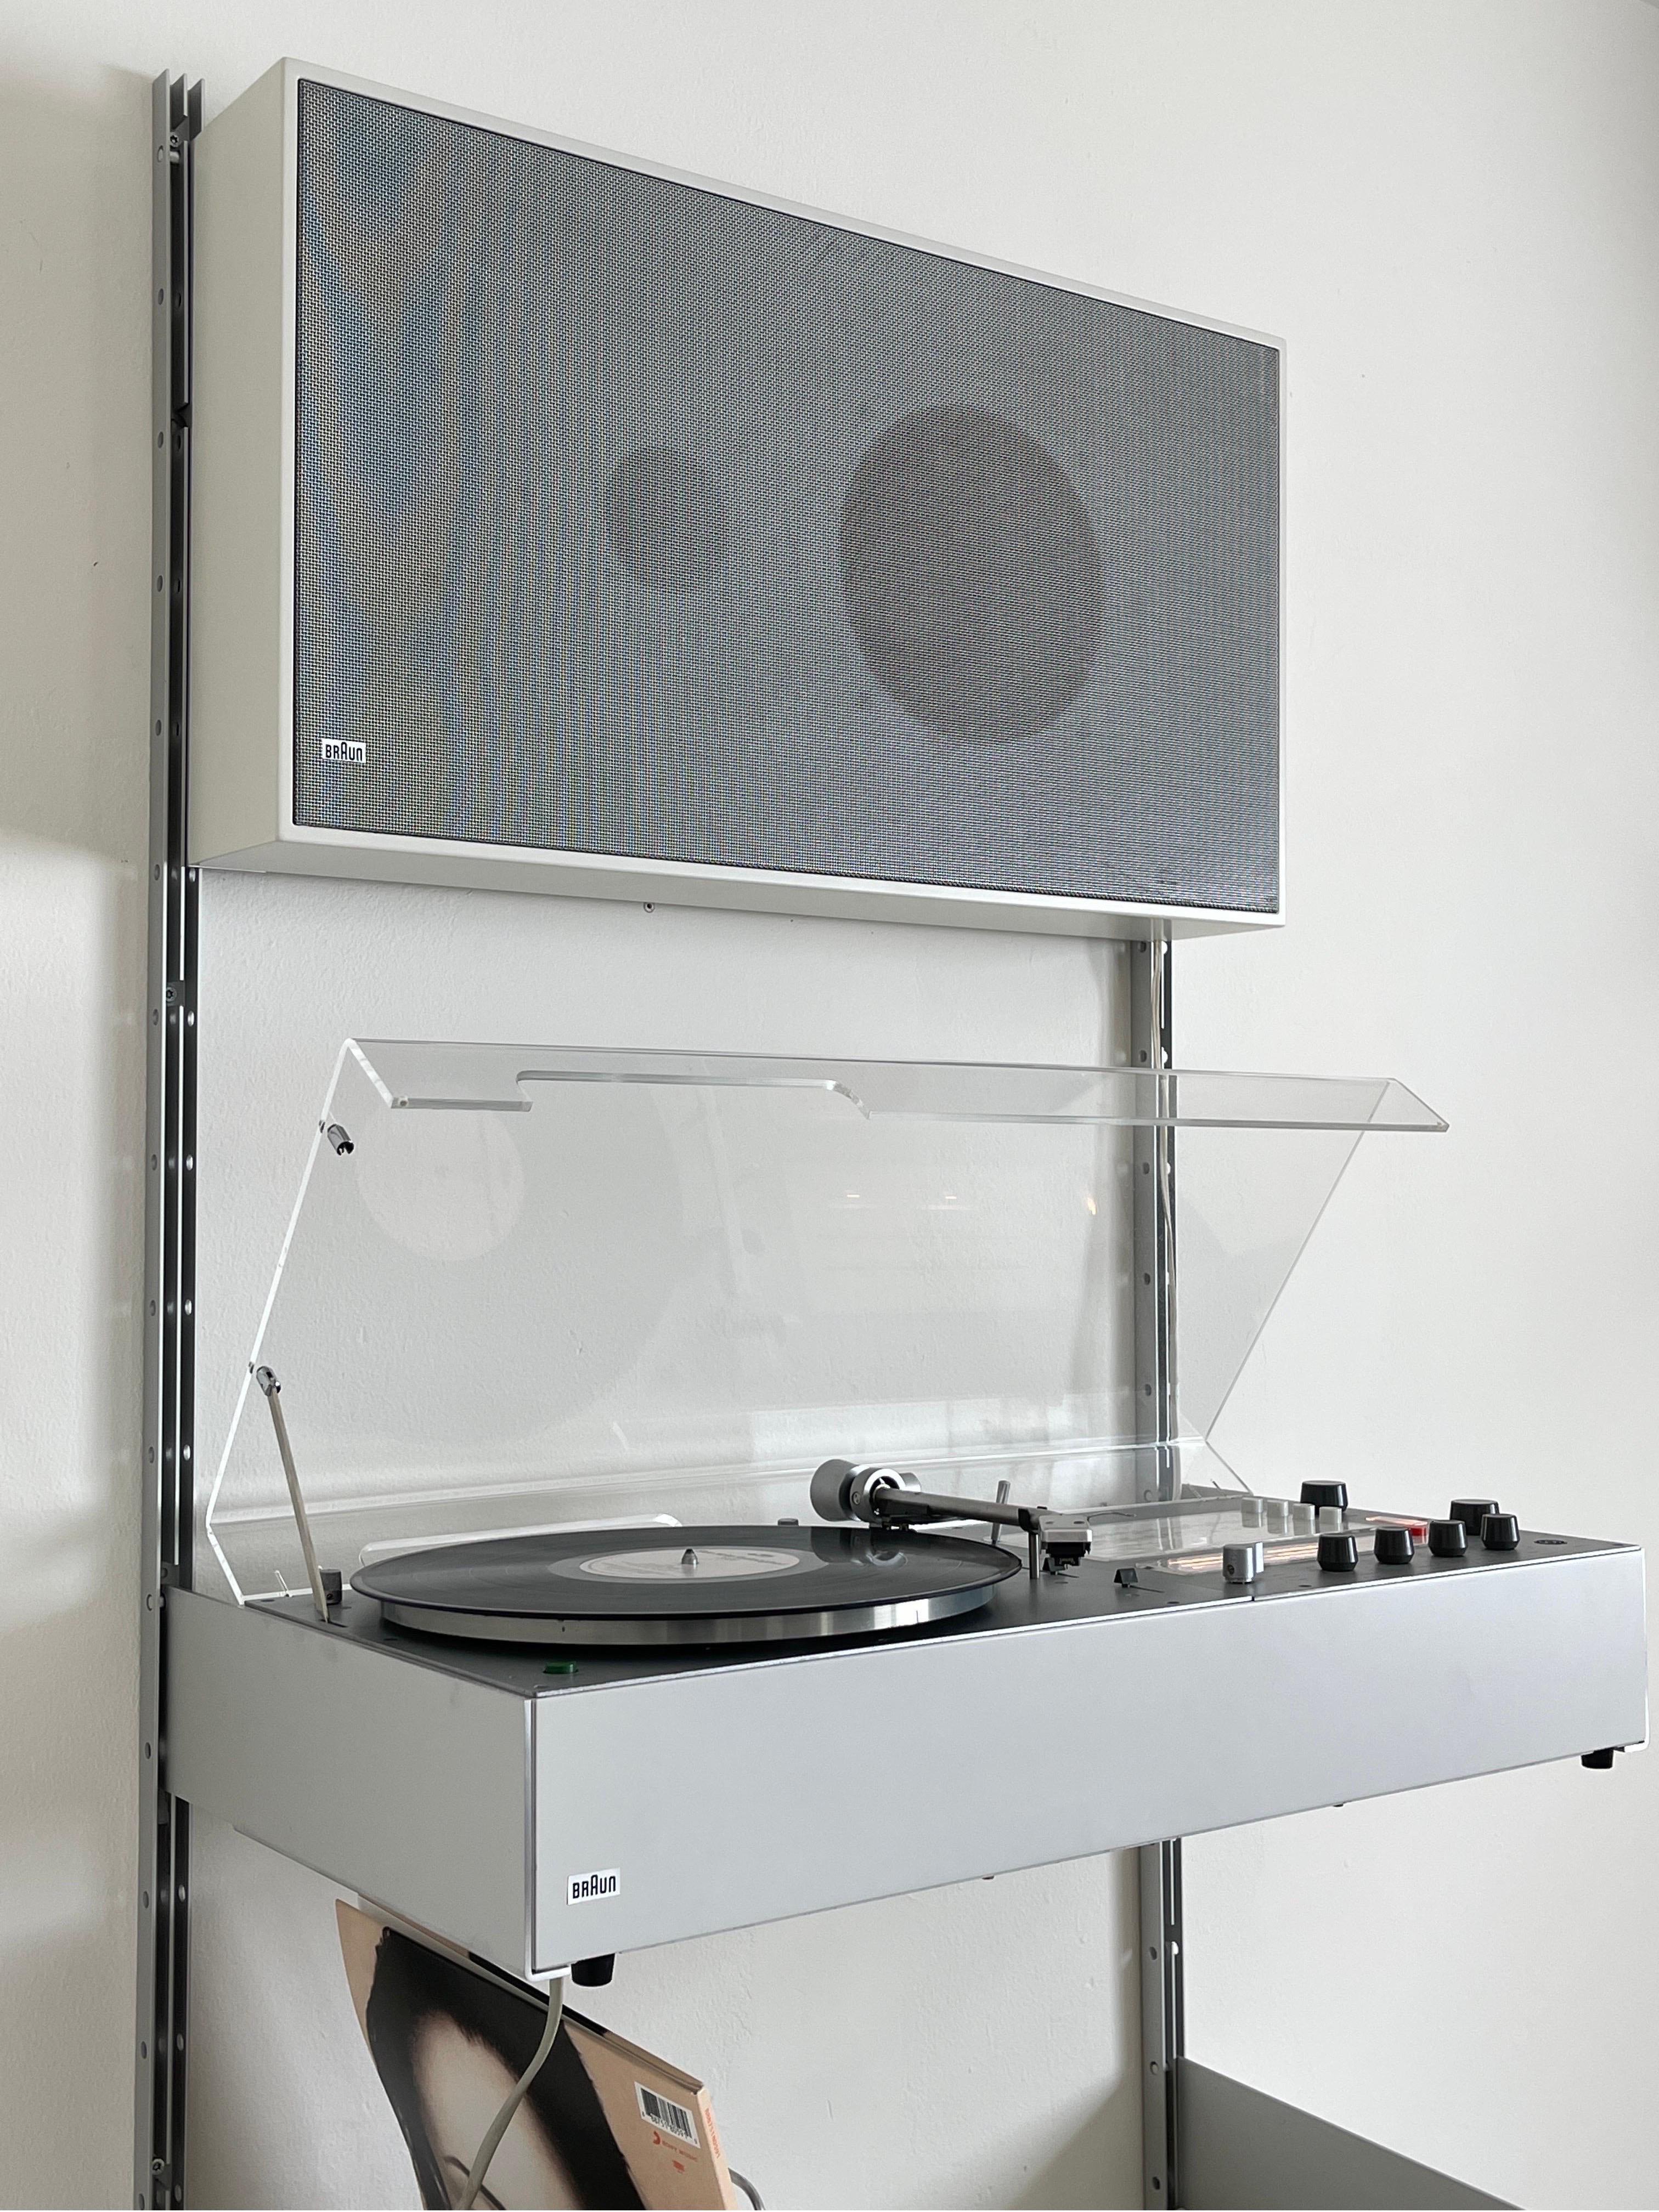 Braun Audio wall mounted audio system designed by Dieter Rams  1